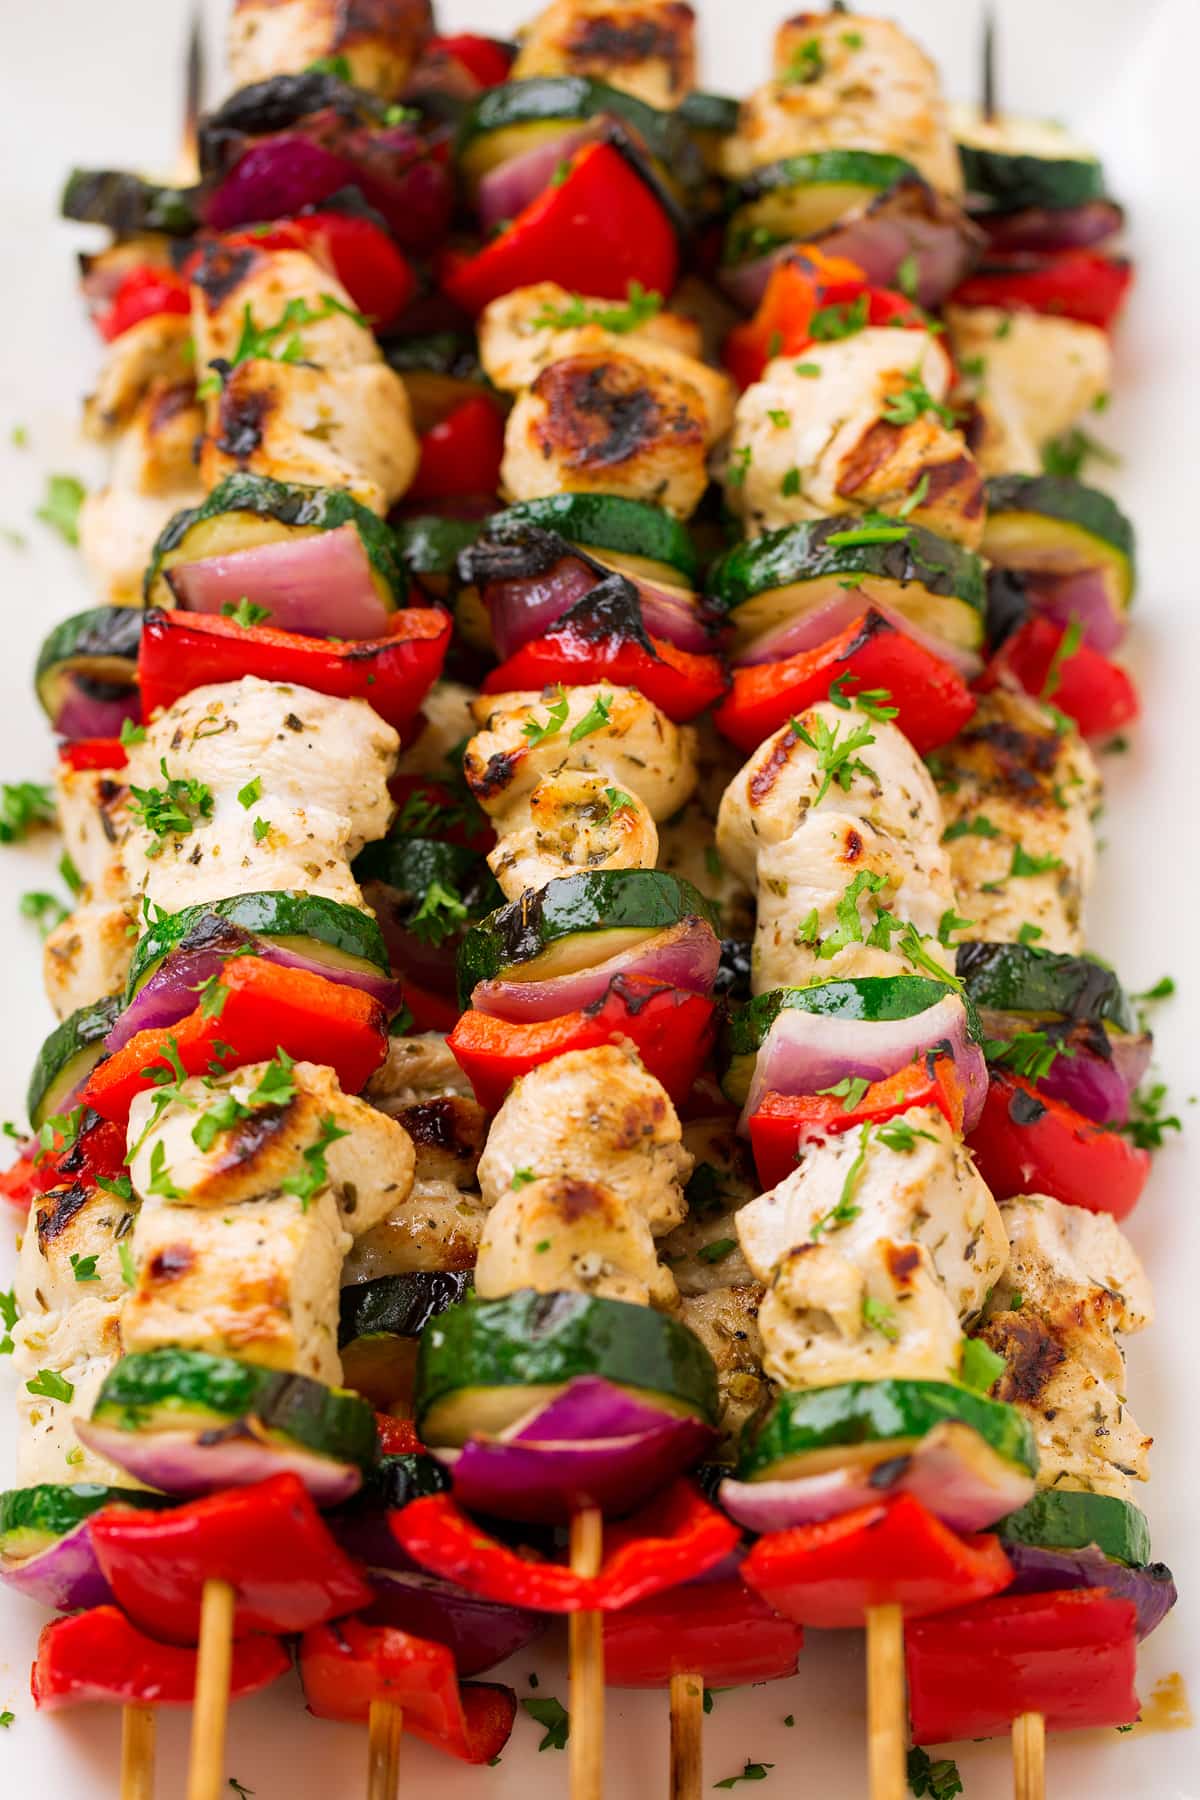 Greek Chicken Kebabs on skewers with marinated chicken breast, zucchini, bell pepper and red onion.